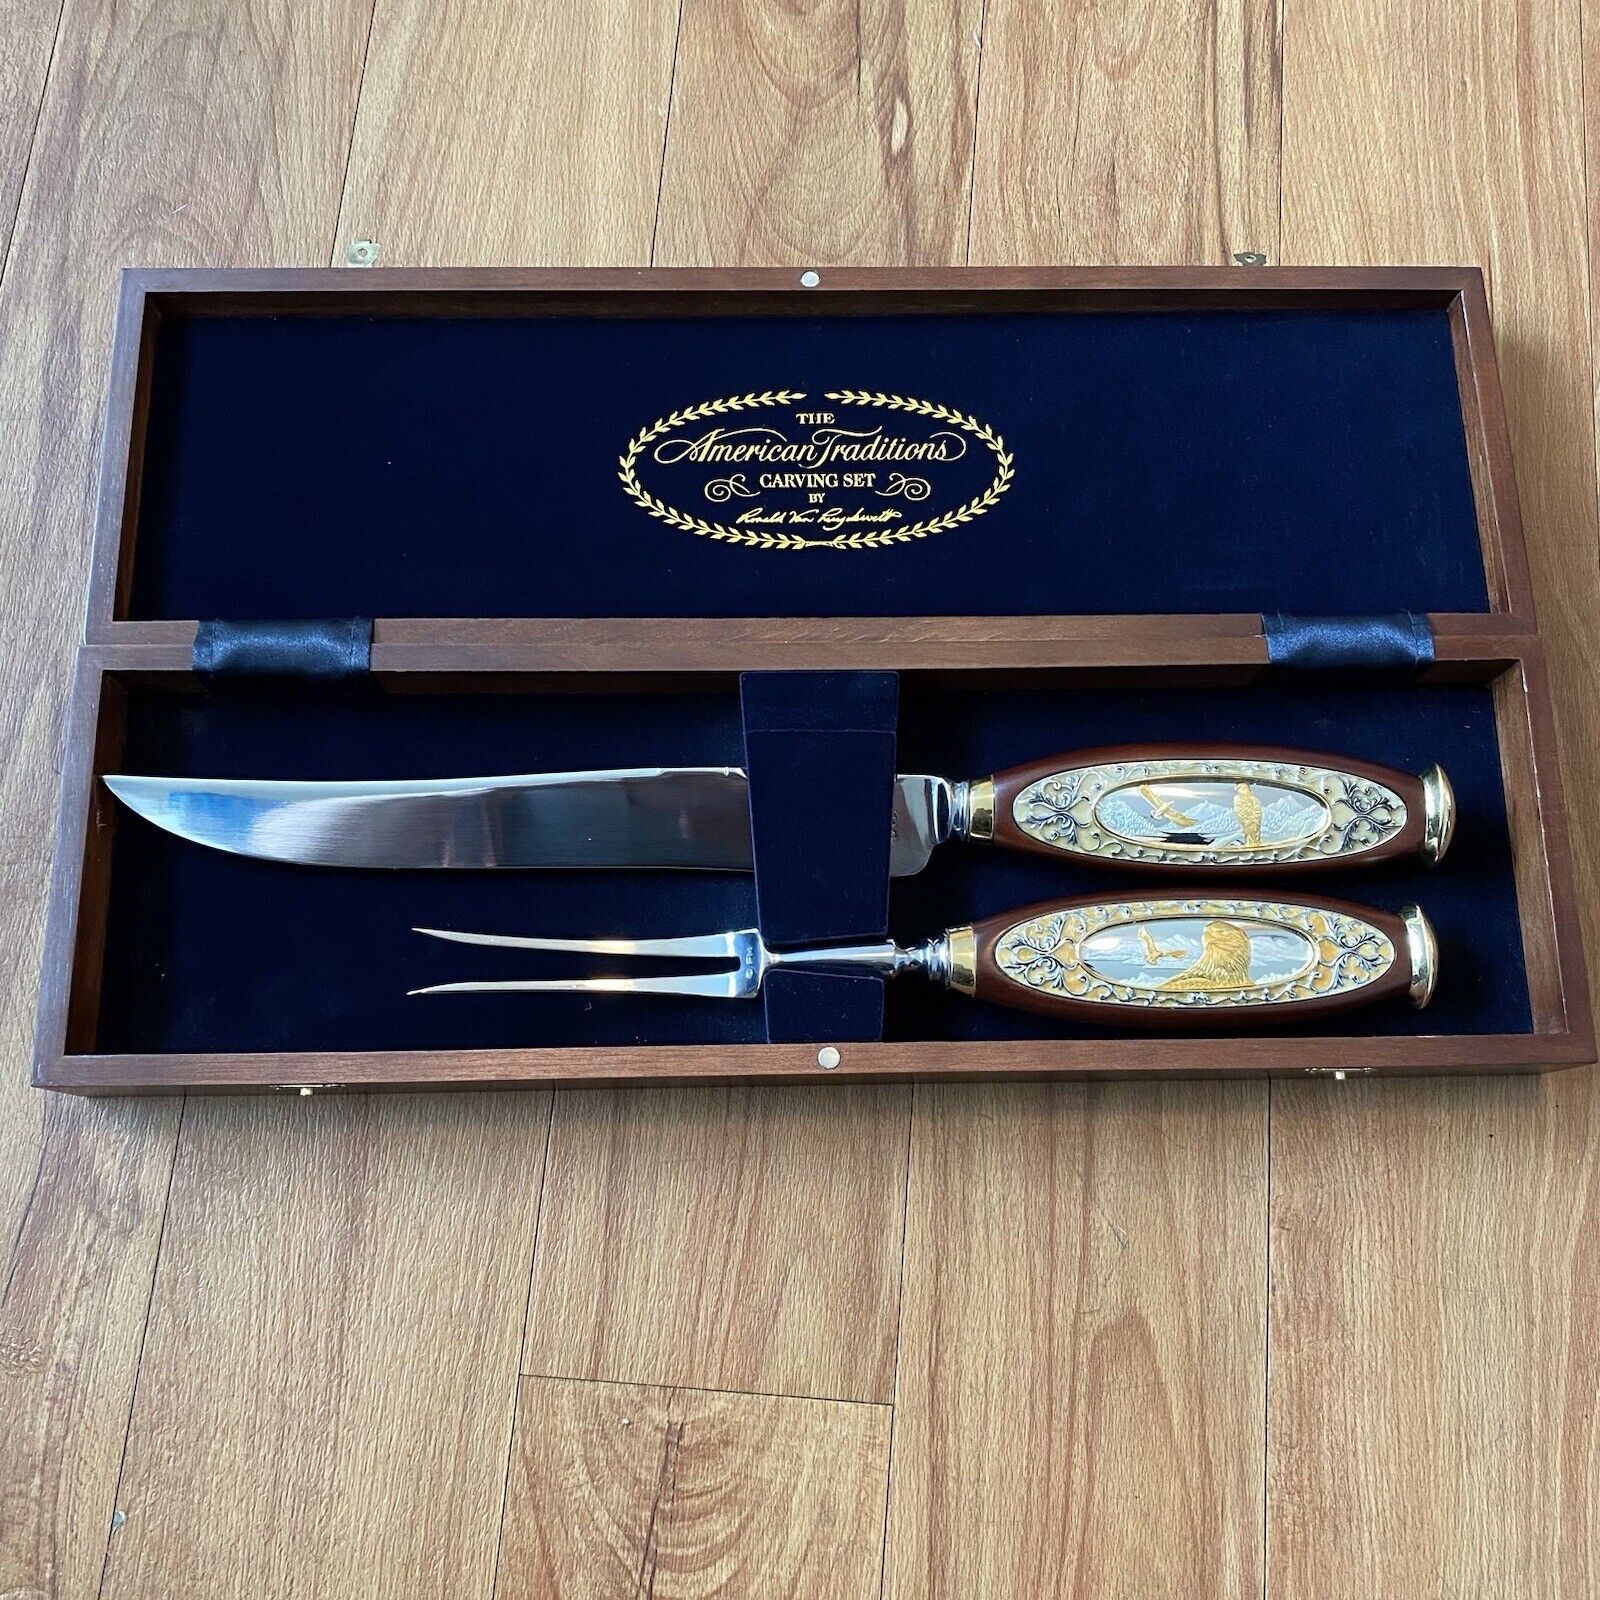 FRANKLIN MINT AMERICAN TRADITIONS CARVING SET BY RONALD VAN RUYCKEVELT 